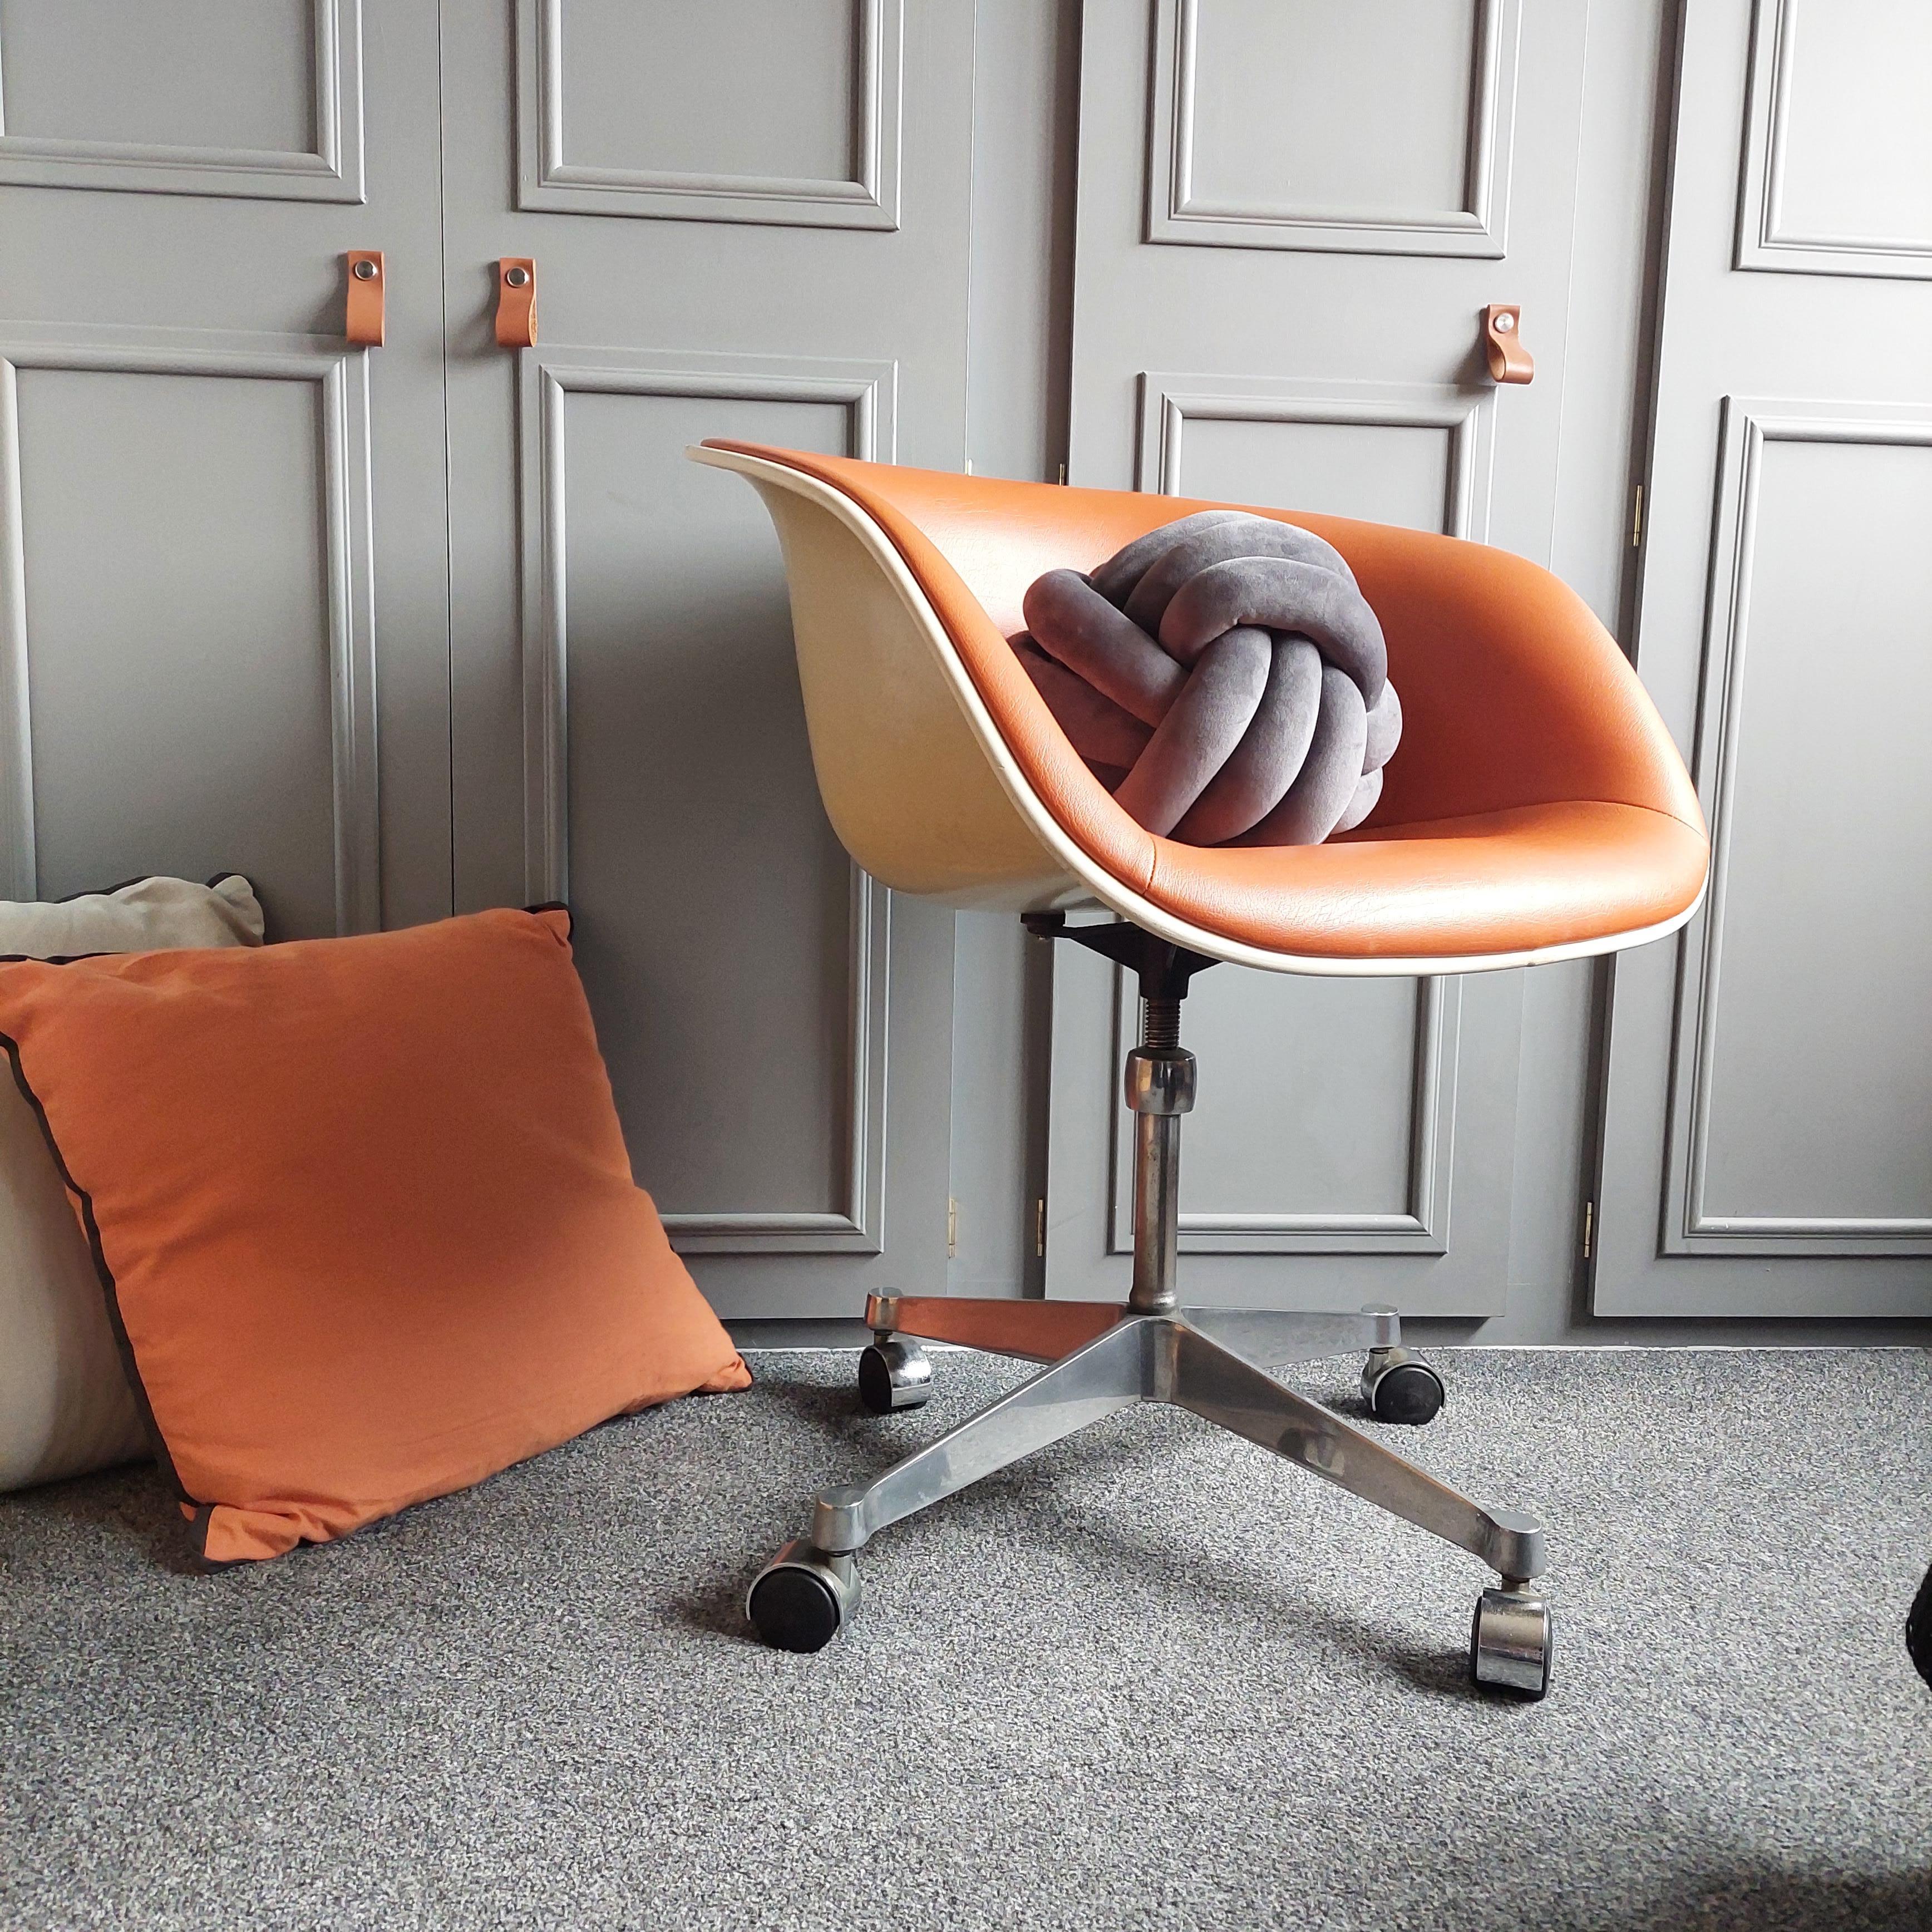 La Fonda chair by Charles and Ray Eames, designed in 1961.
Fabulous original orange leatherette atacched to the fiberglass body.
Swivel cast iron base with 4 star feet on wheels.
Adjustable seat height.

This armchair, American design icon of